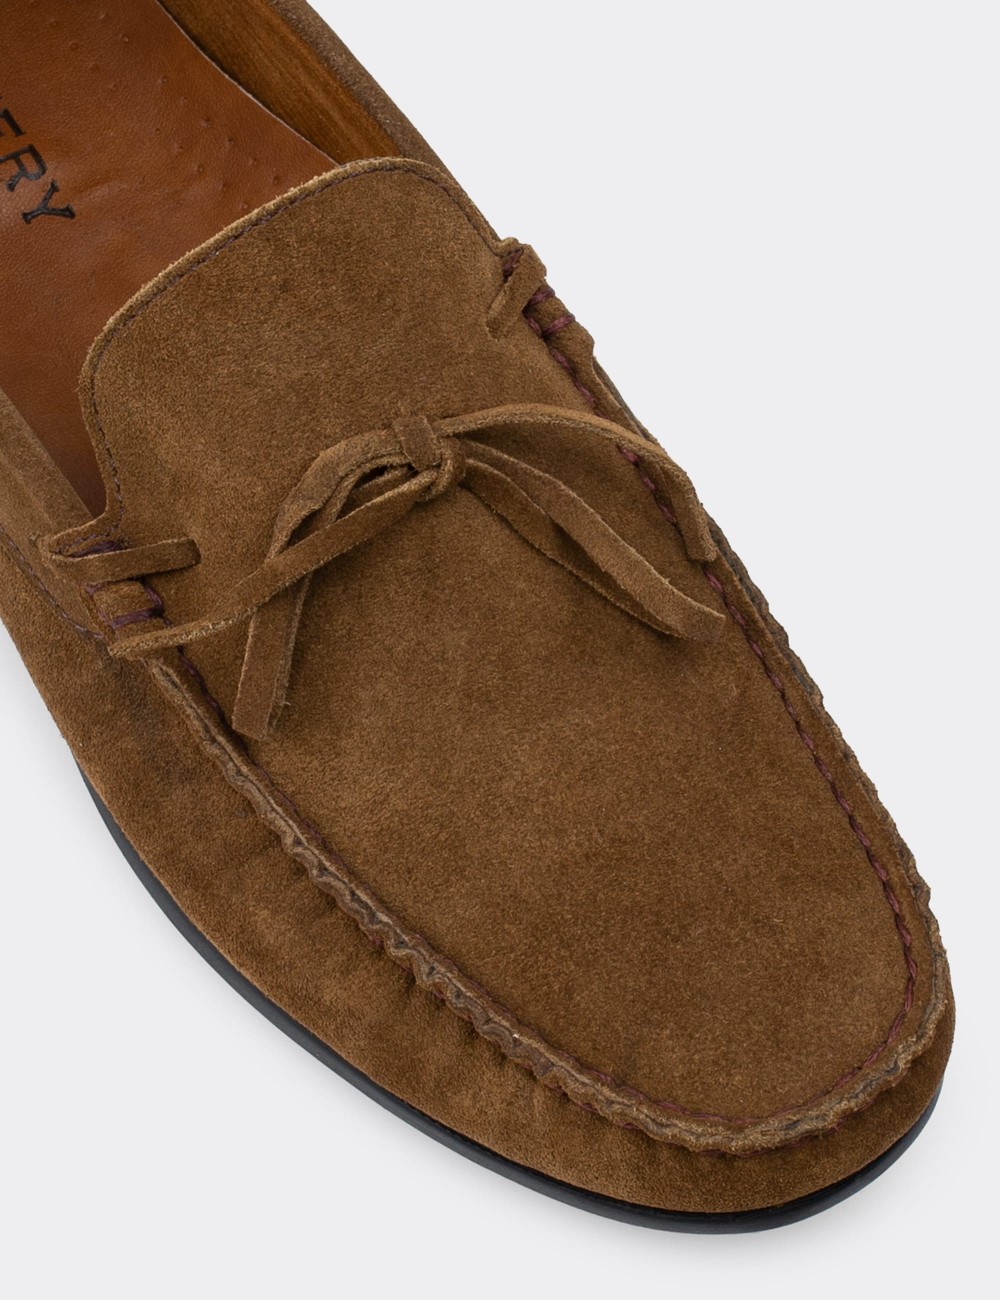 Tan Suede Leather Driving Shoes - 01647MTBAC05